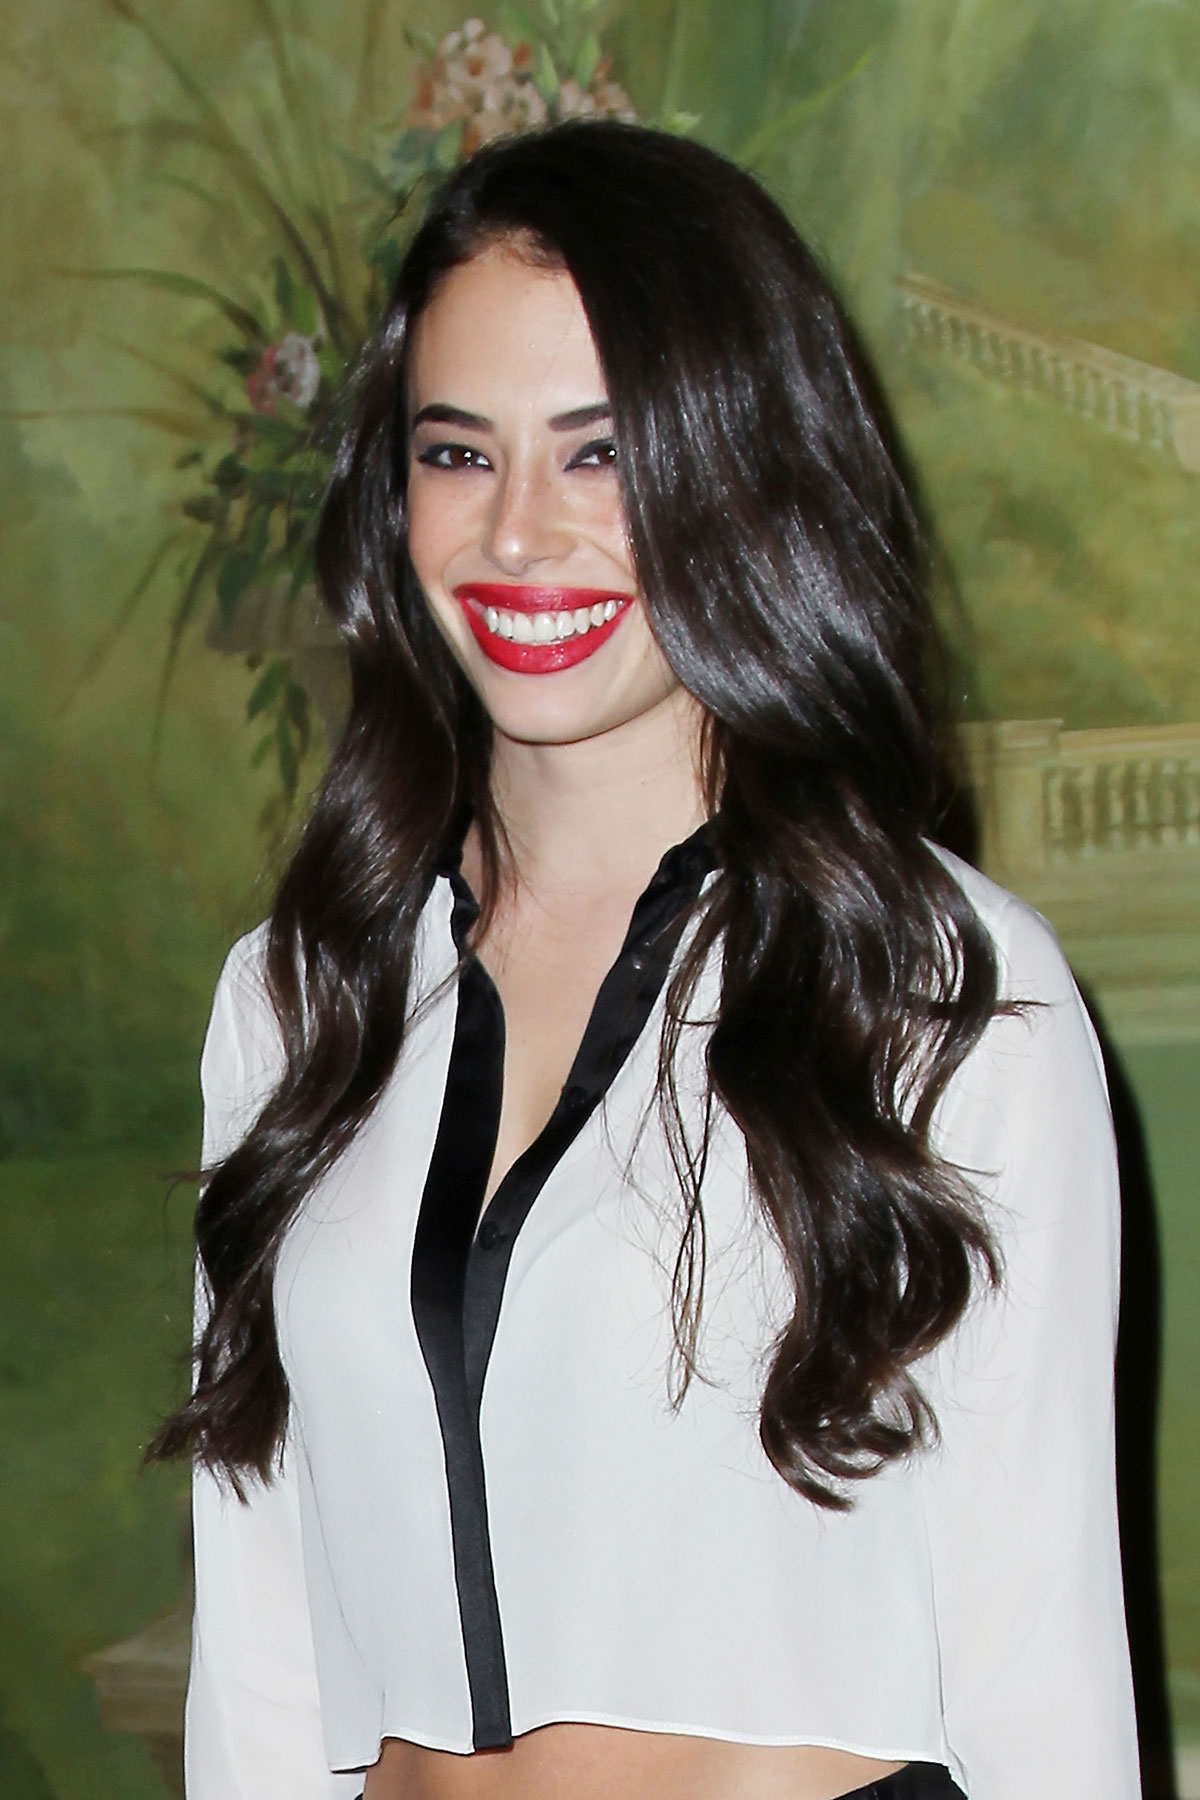 Chloe Bridges attends the Alice and Olivia by Stacey Bendet Spring 2015